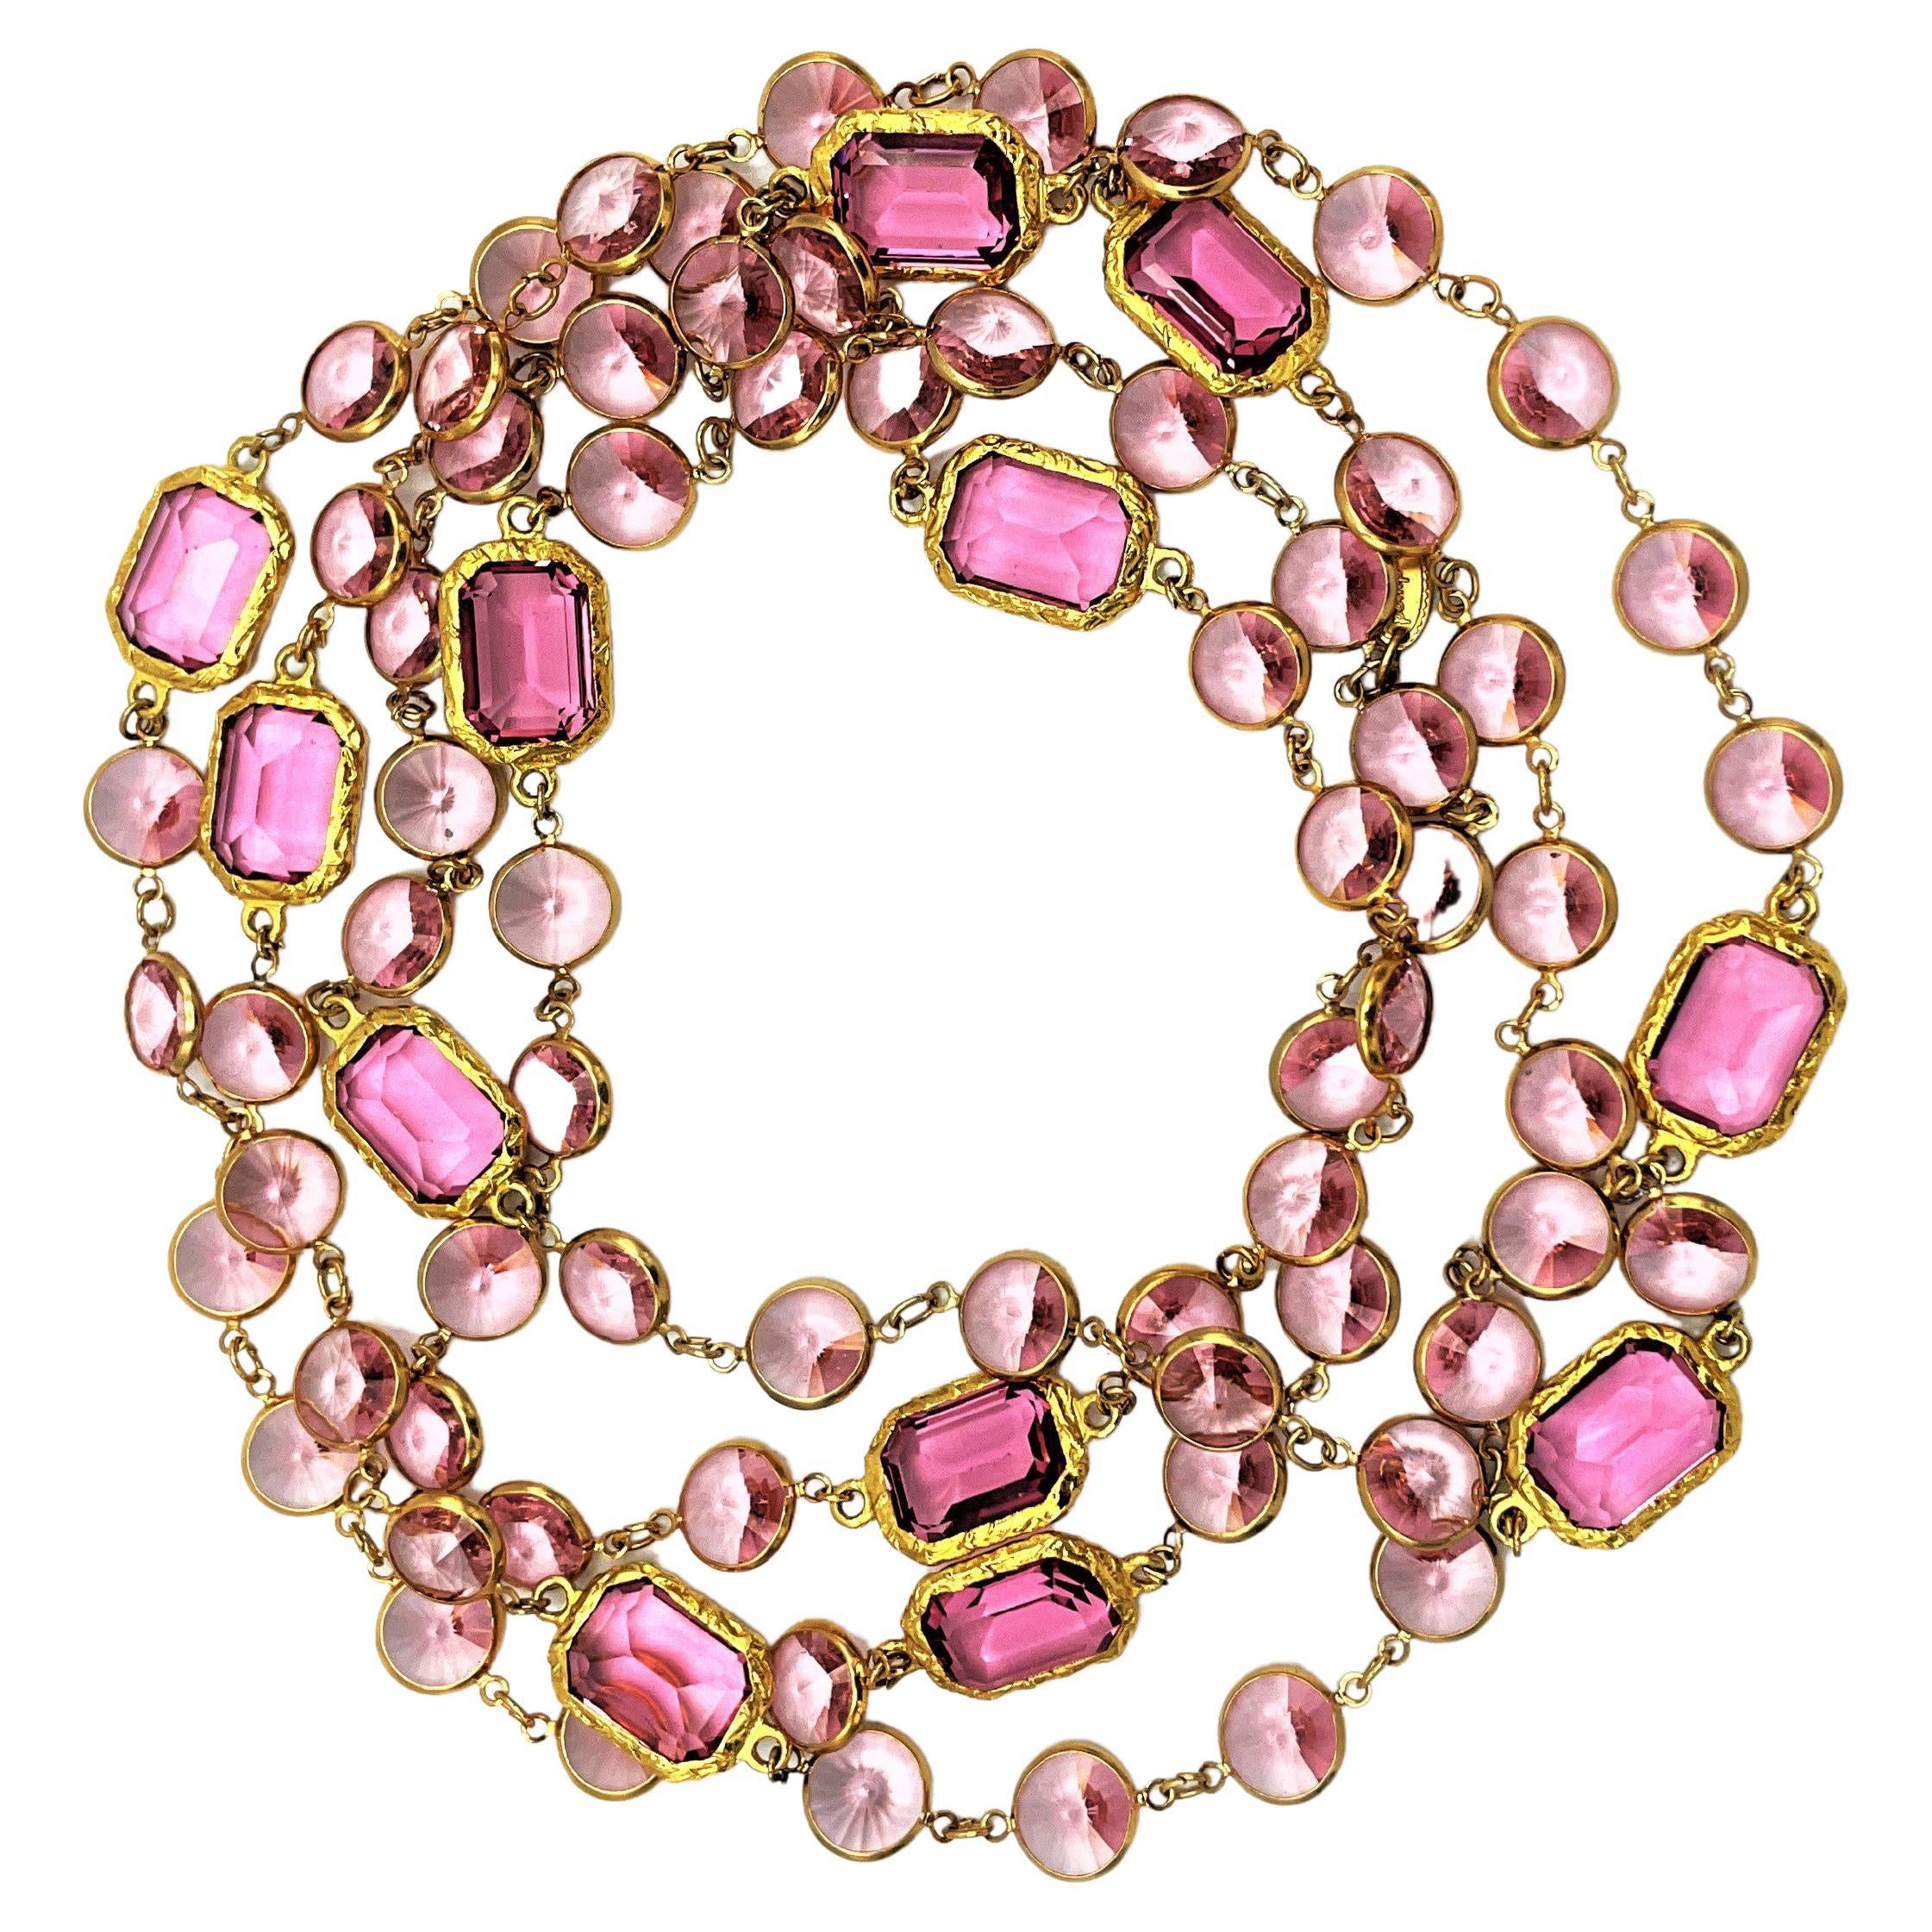  Necklace like the Chanel Chanel, pink Swarovski crystals gold plated, new  